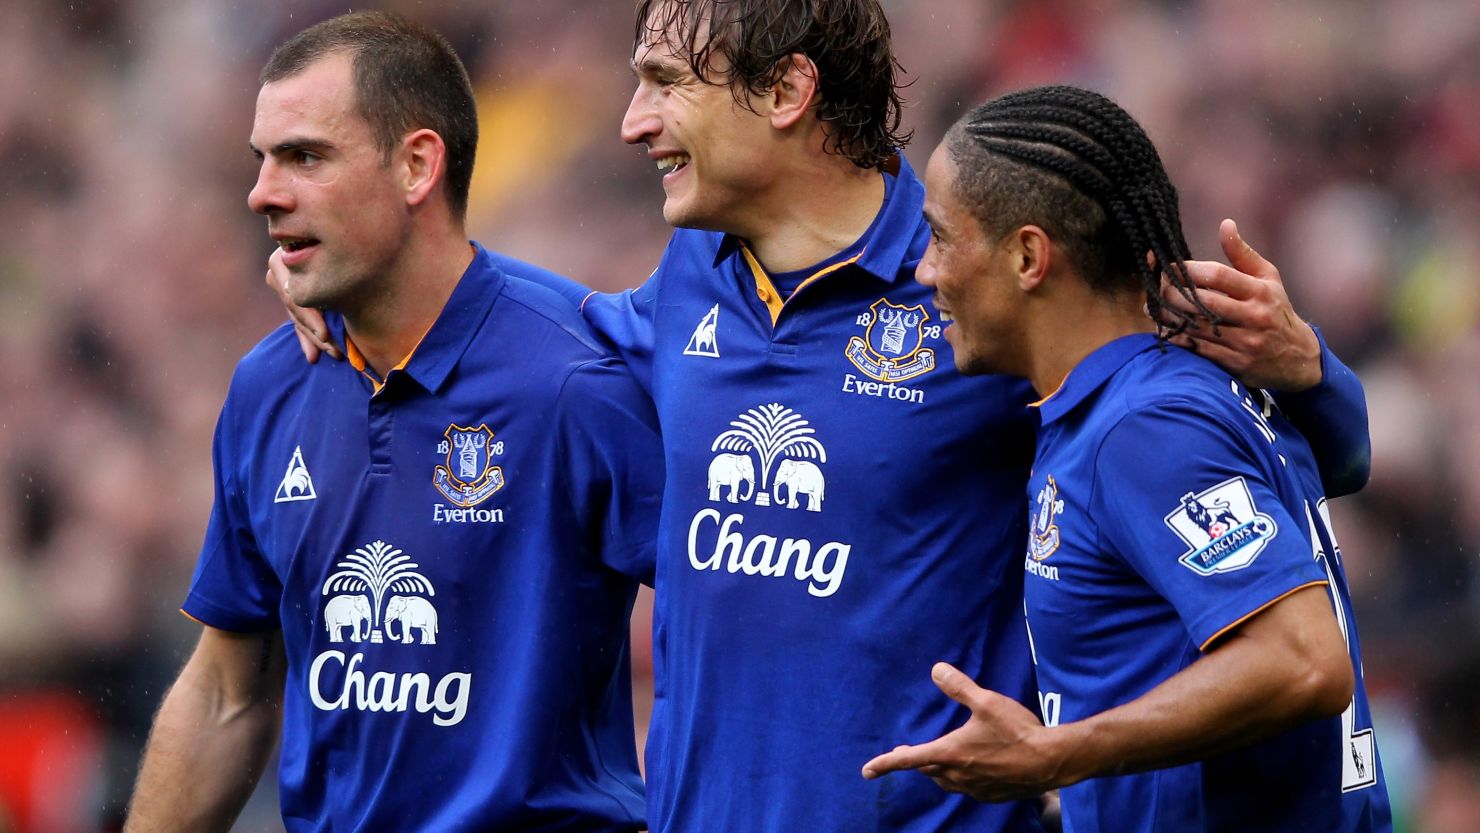 Everton's players celebrate as they battled to a 4-4 draw at Old Trafford against Manchester United.